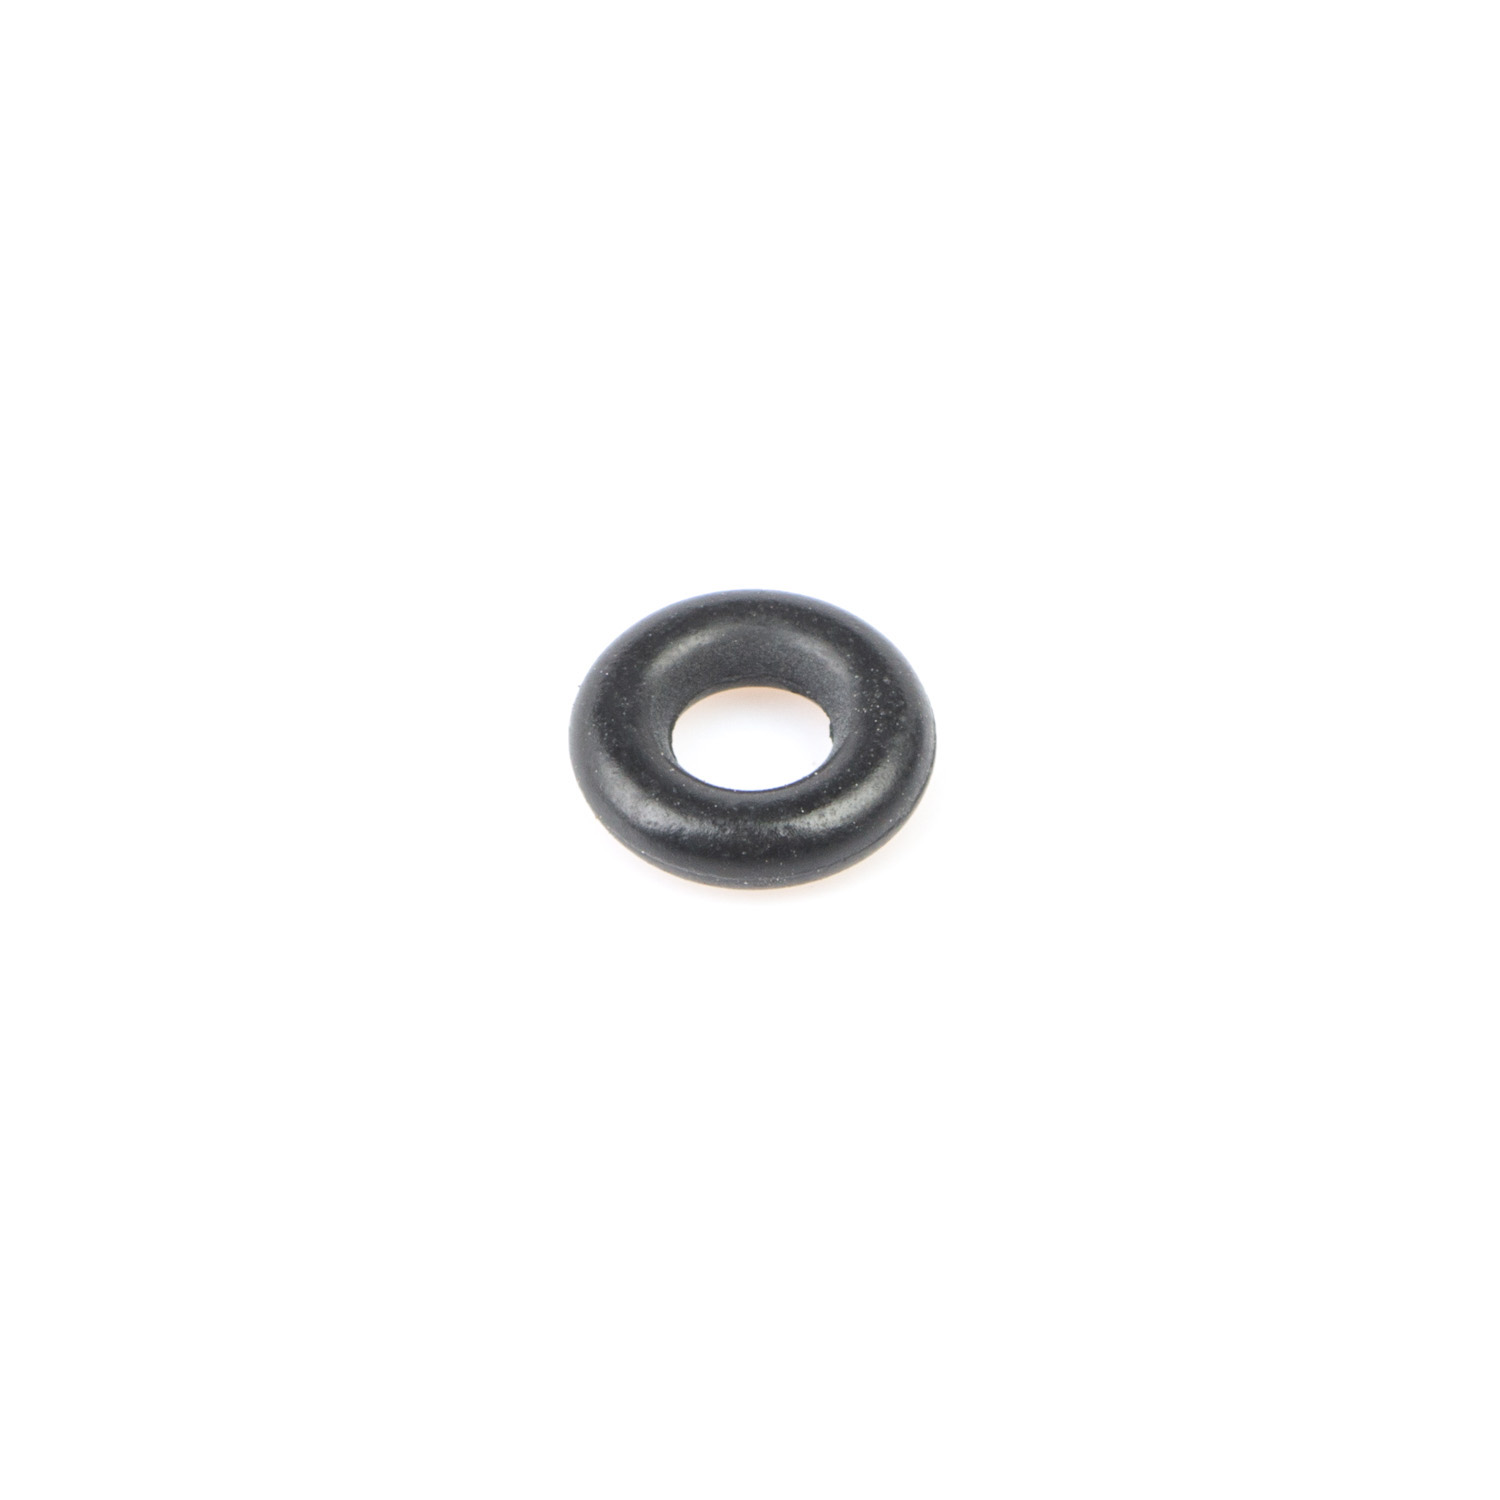 DT100 USA Carb Idle Screw O-Ring (5HP Models Only)